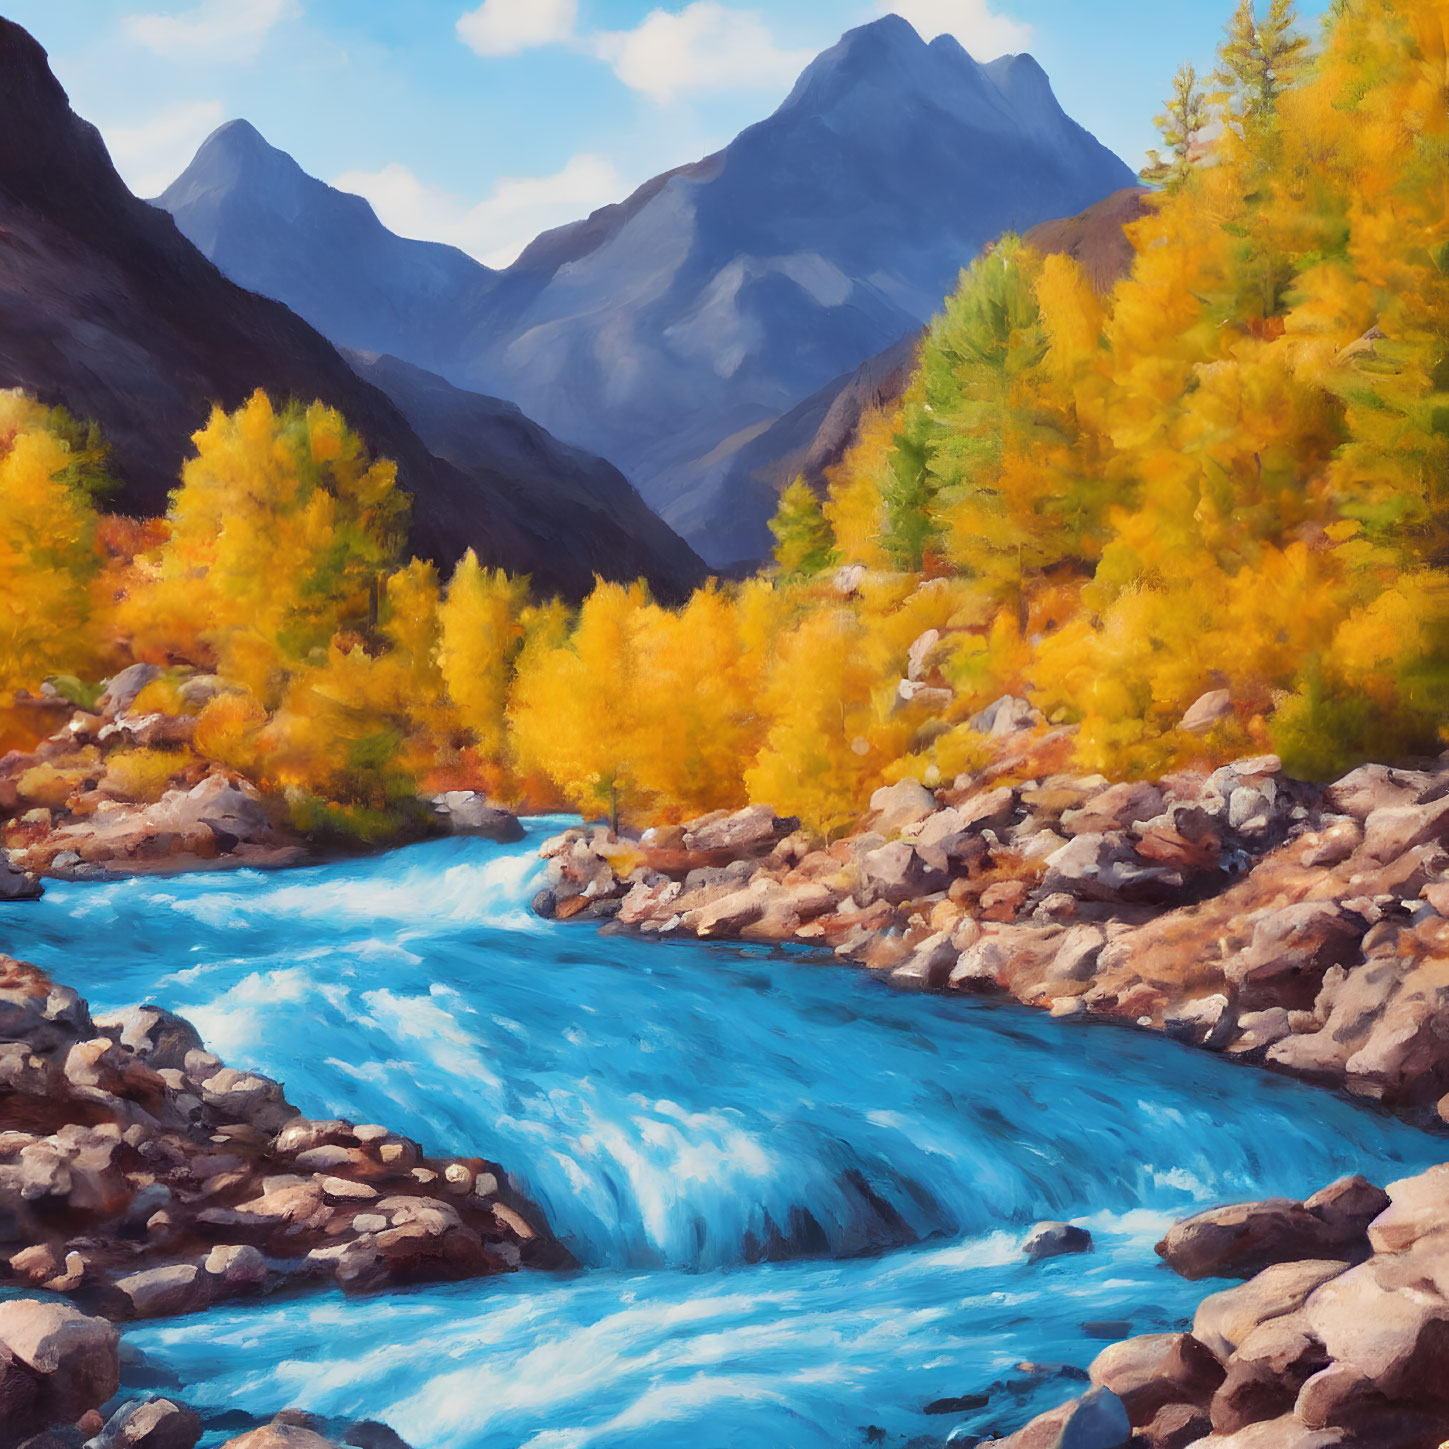 Colorful mountain landscape with blue river and autumn trees.